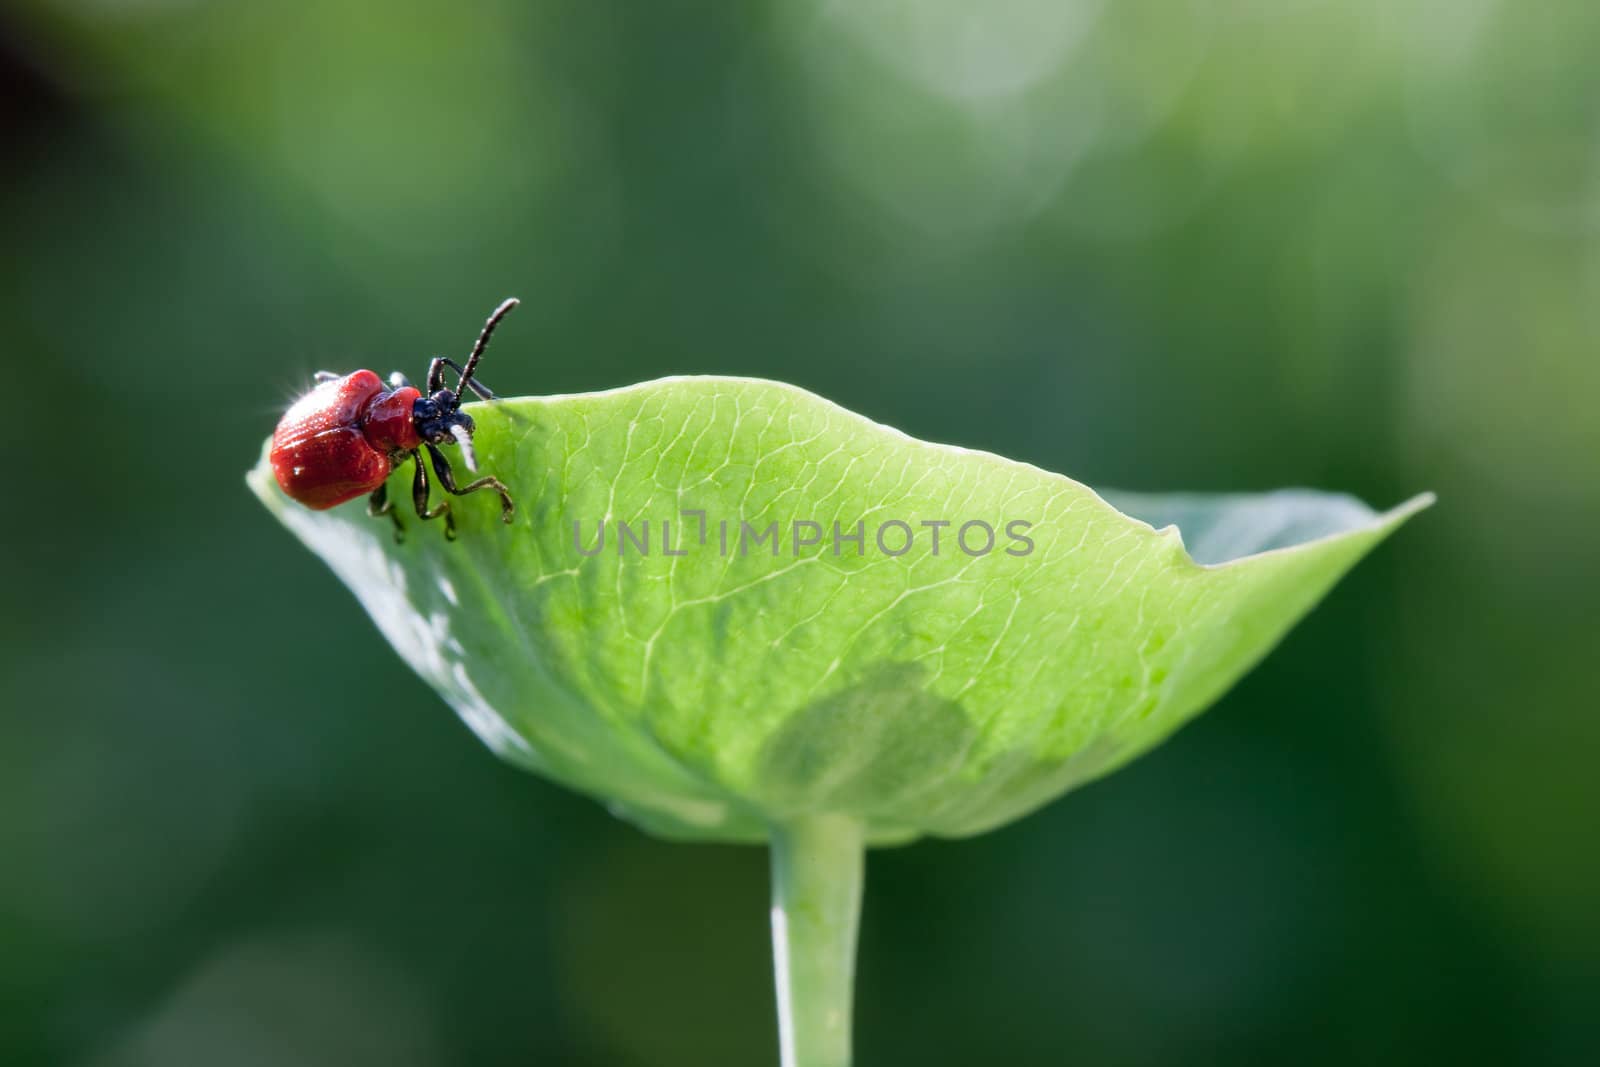 Bug with red armor travels round the plant